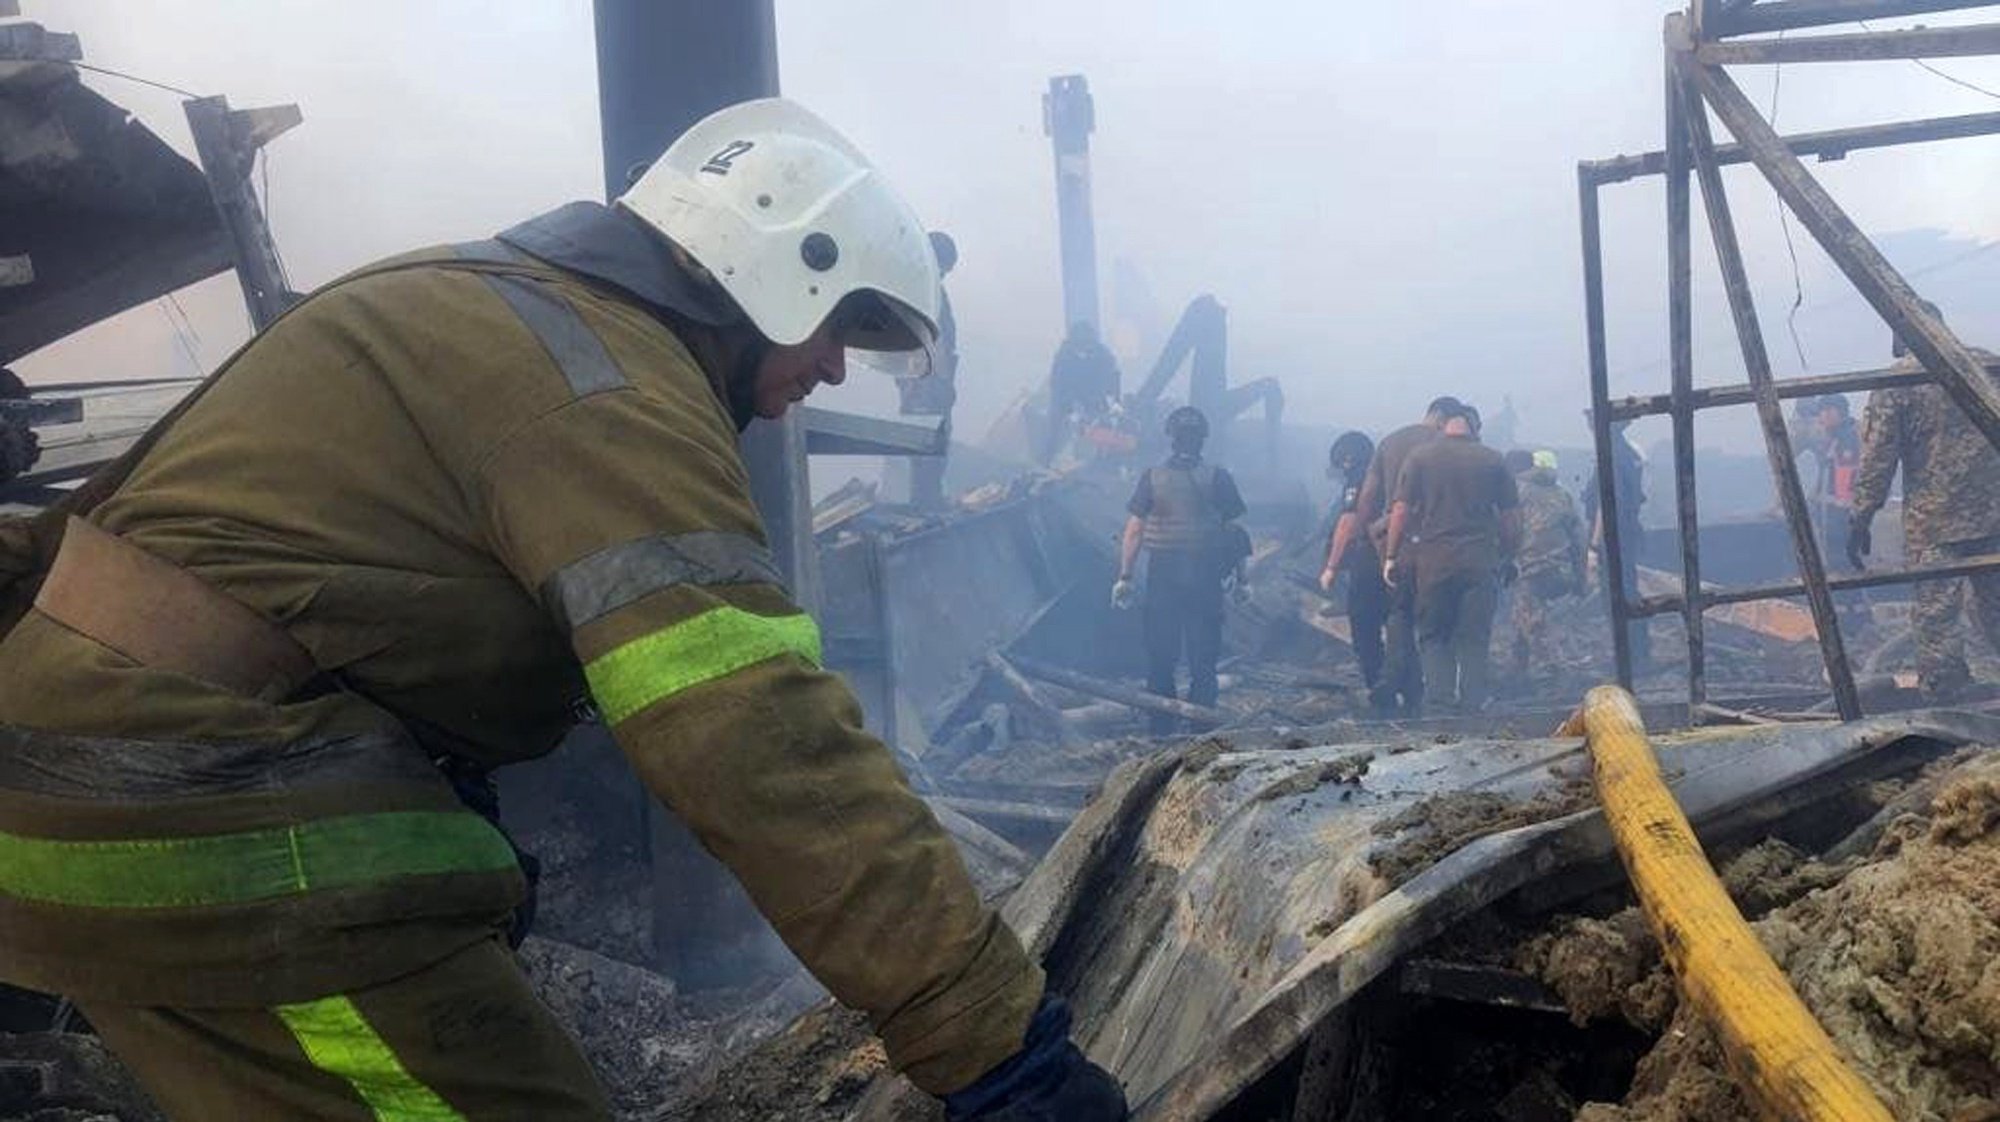 epa10037221 A handout photo released by the press service of the State Emergency Service (SES) of Ukraine shows firefighters and rescue services working to extinguishe a fire at a shopping center in Kremenchuk, Ukraine, 27 June 2022. The State Emergency Service (SES) of Ukraine said that the bodies of six dead persons were found at the spot of the Amstor shopping center fire following missile strikes. The one-story building of a shopping center was hit by rockets, the SES stated further.  EPA/STATE EMERGENCY SERVICE OF UKRAINE HANDOUT -- BEST QUALITY AVAILABLE -- MANDATORY CREDIT: STATE EMERGENCY SERVICE OF UKRAINE -- HANDOUT EDITORIAL USE ONLY/NO SALES